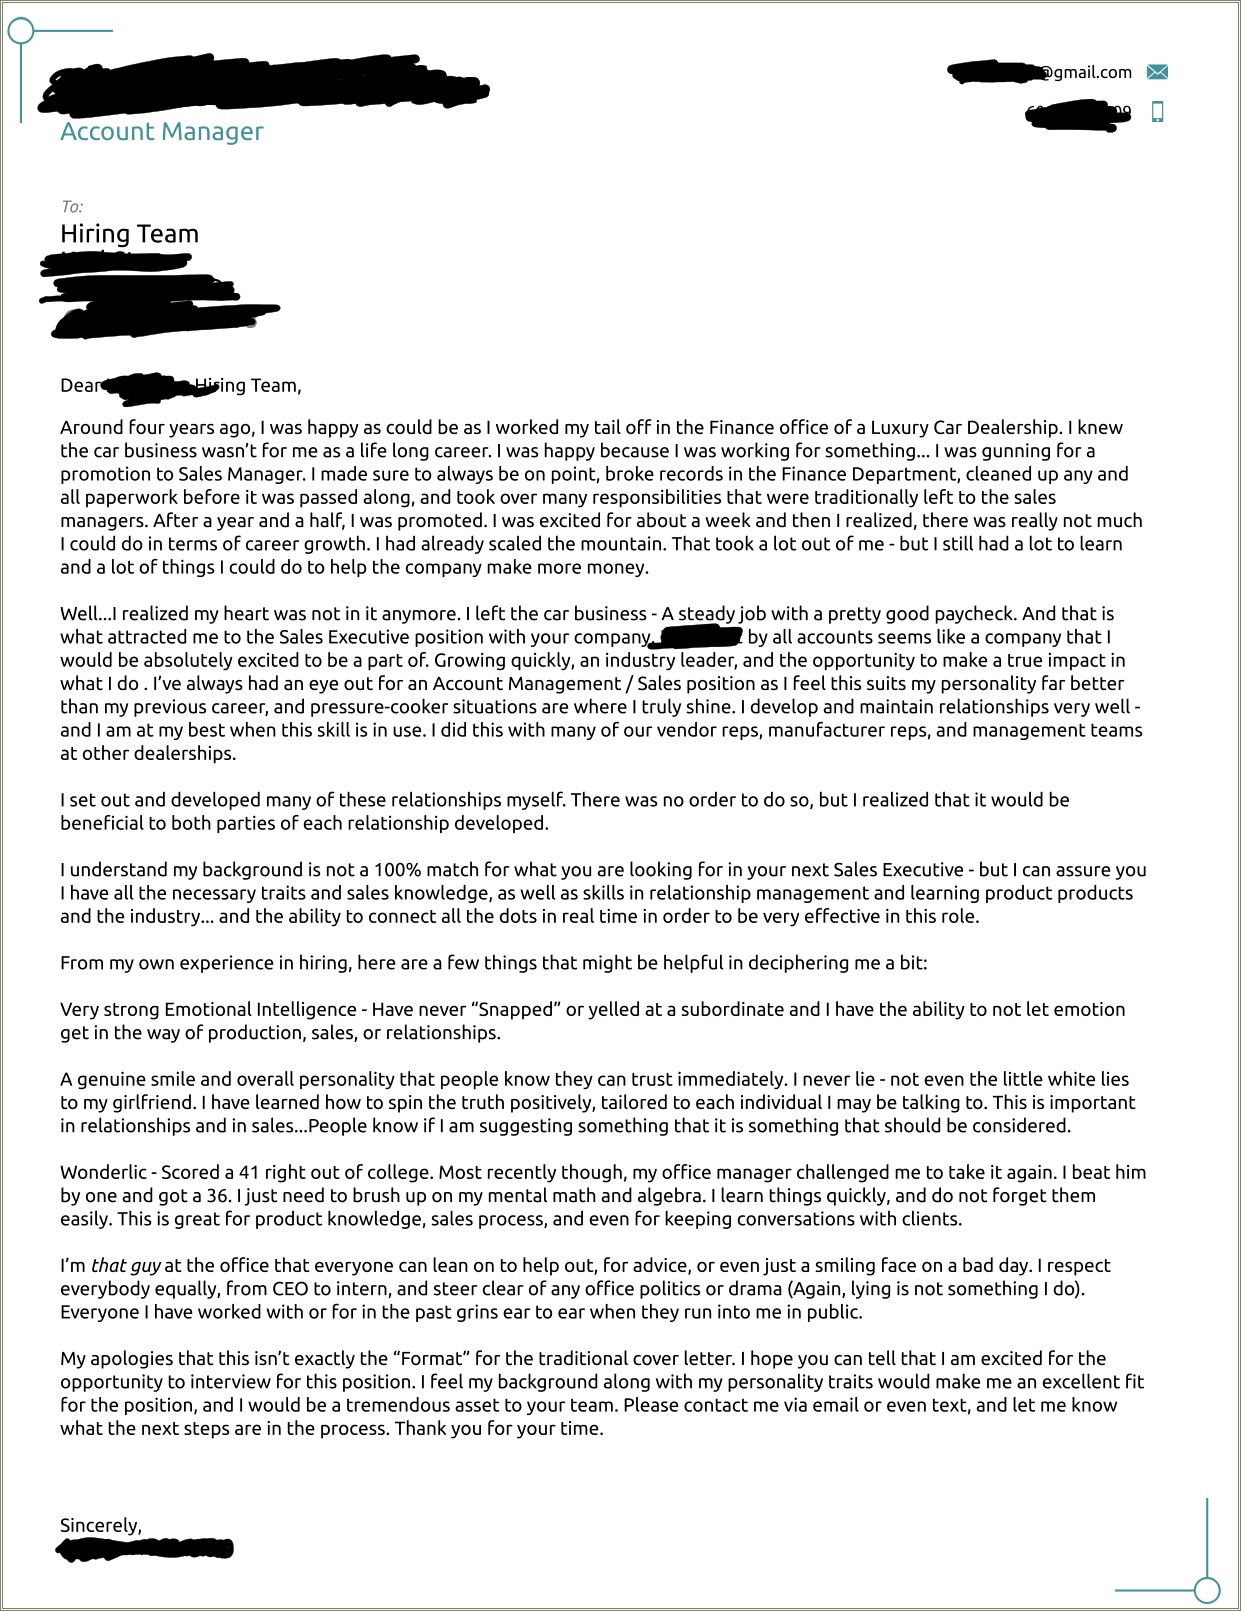 Reddit Do Resumes Need A Cover Letter